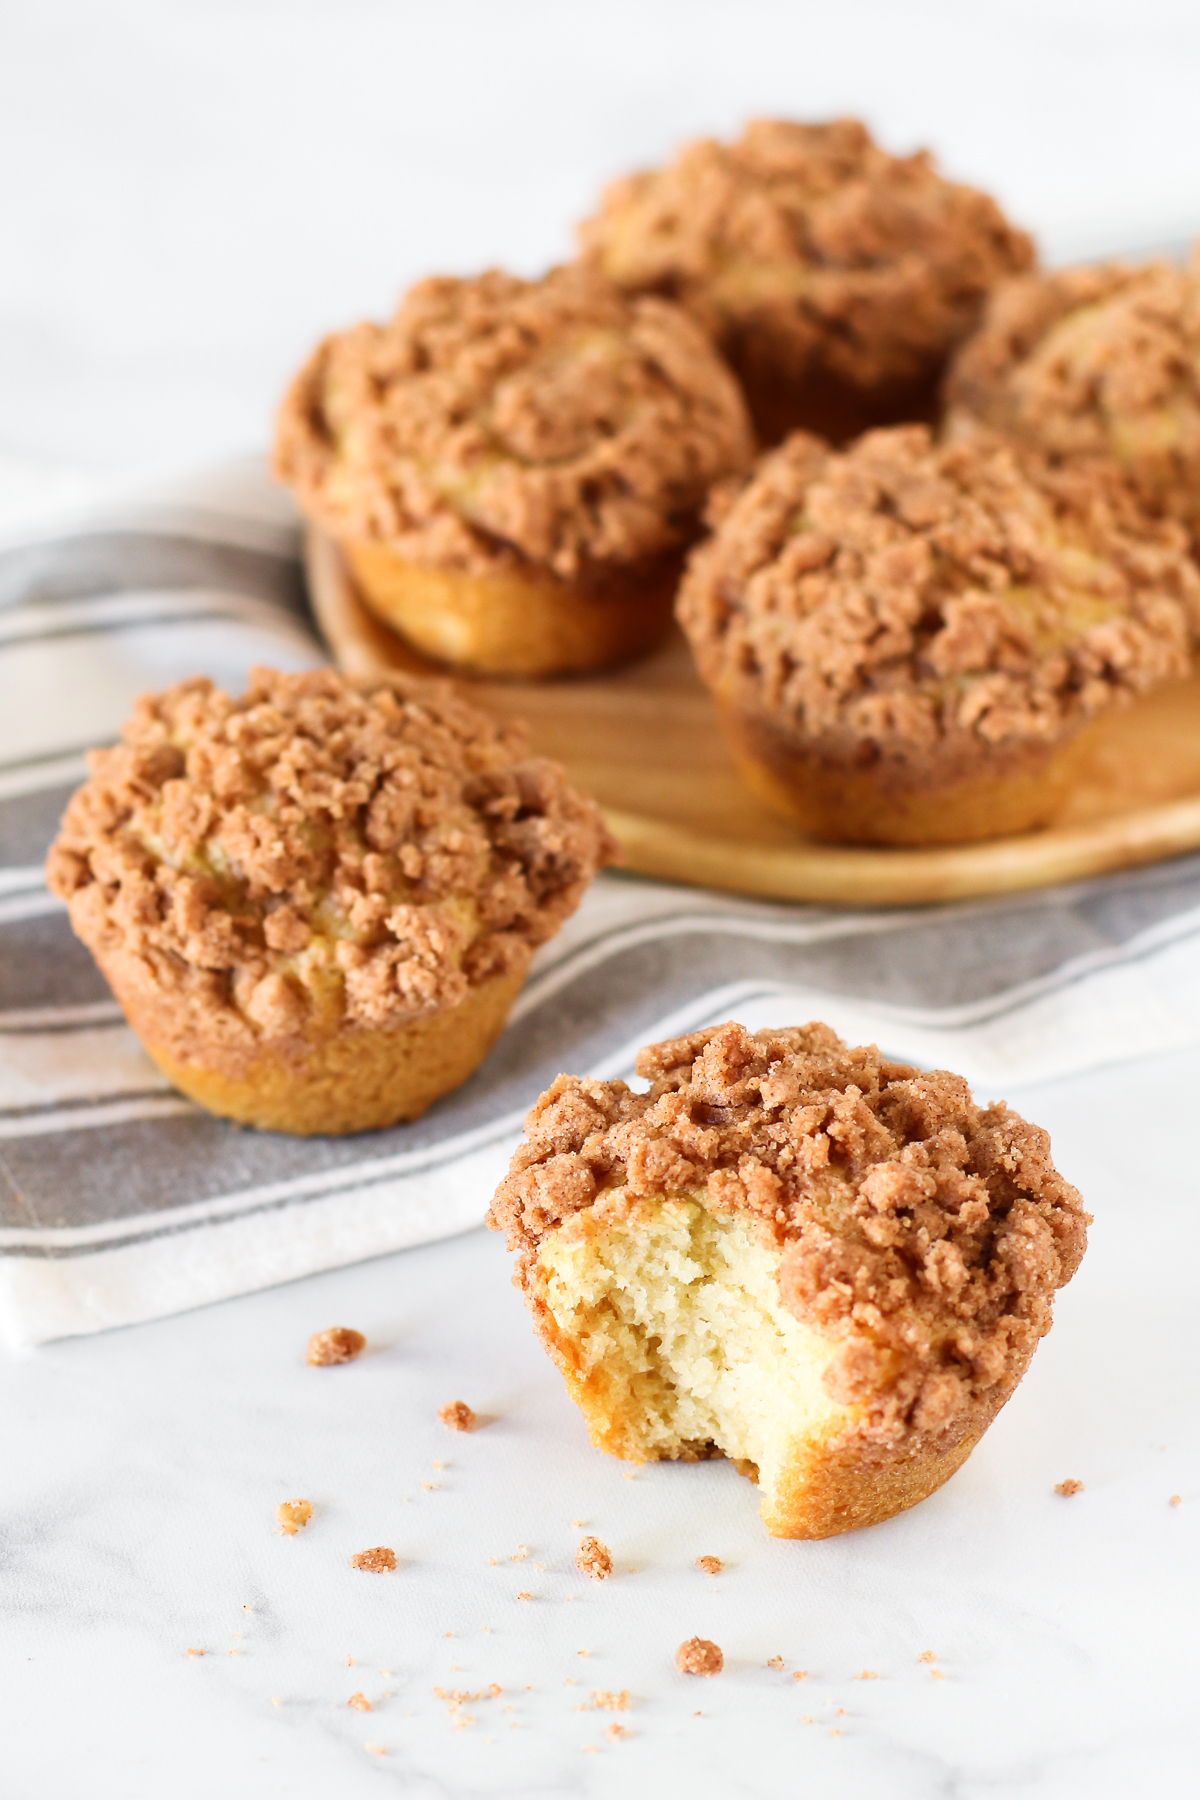 Gluten Free Vegan Coffee Cake Muffins. Fluffy vanilla muffins with a cinnamon crumb topping. Perfectly paired with a cup of coffee or tea!